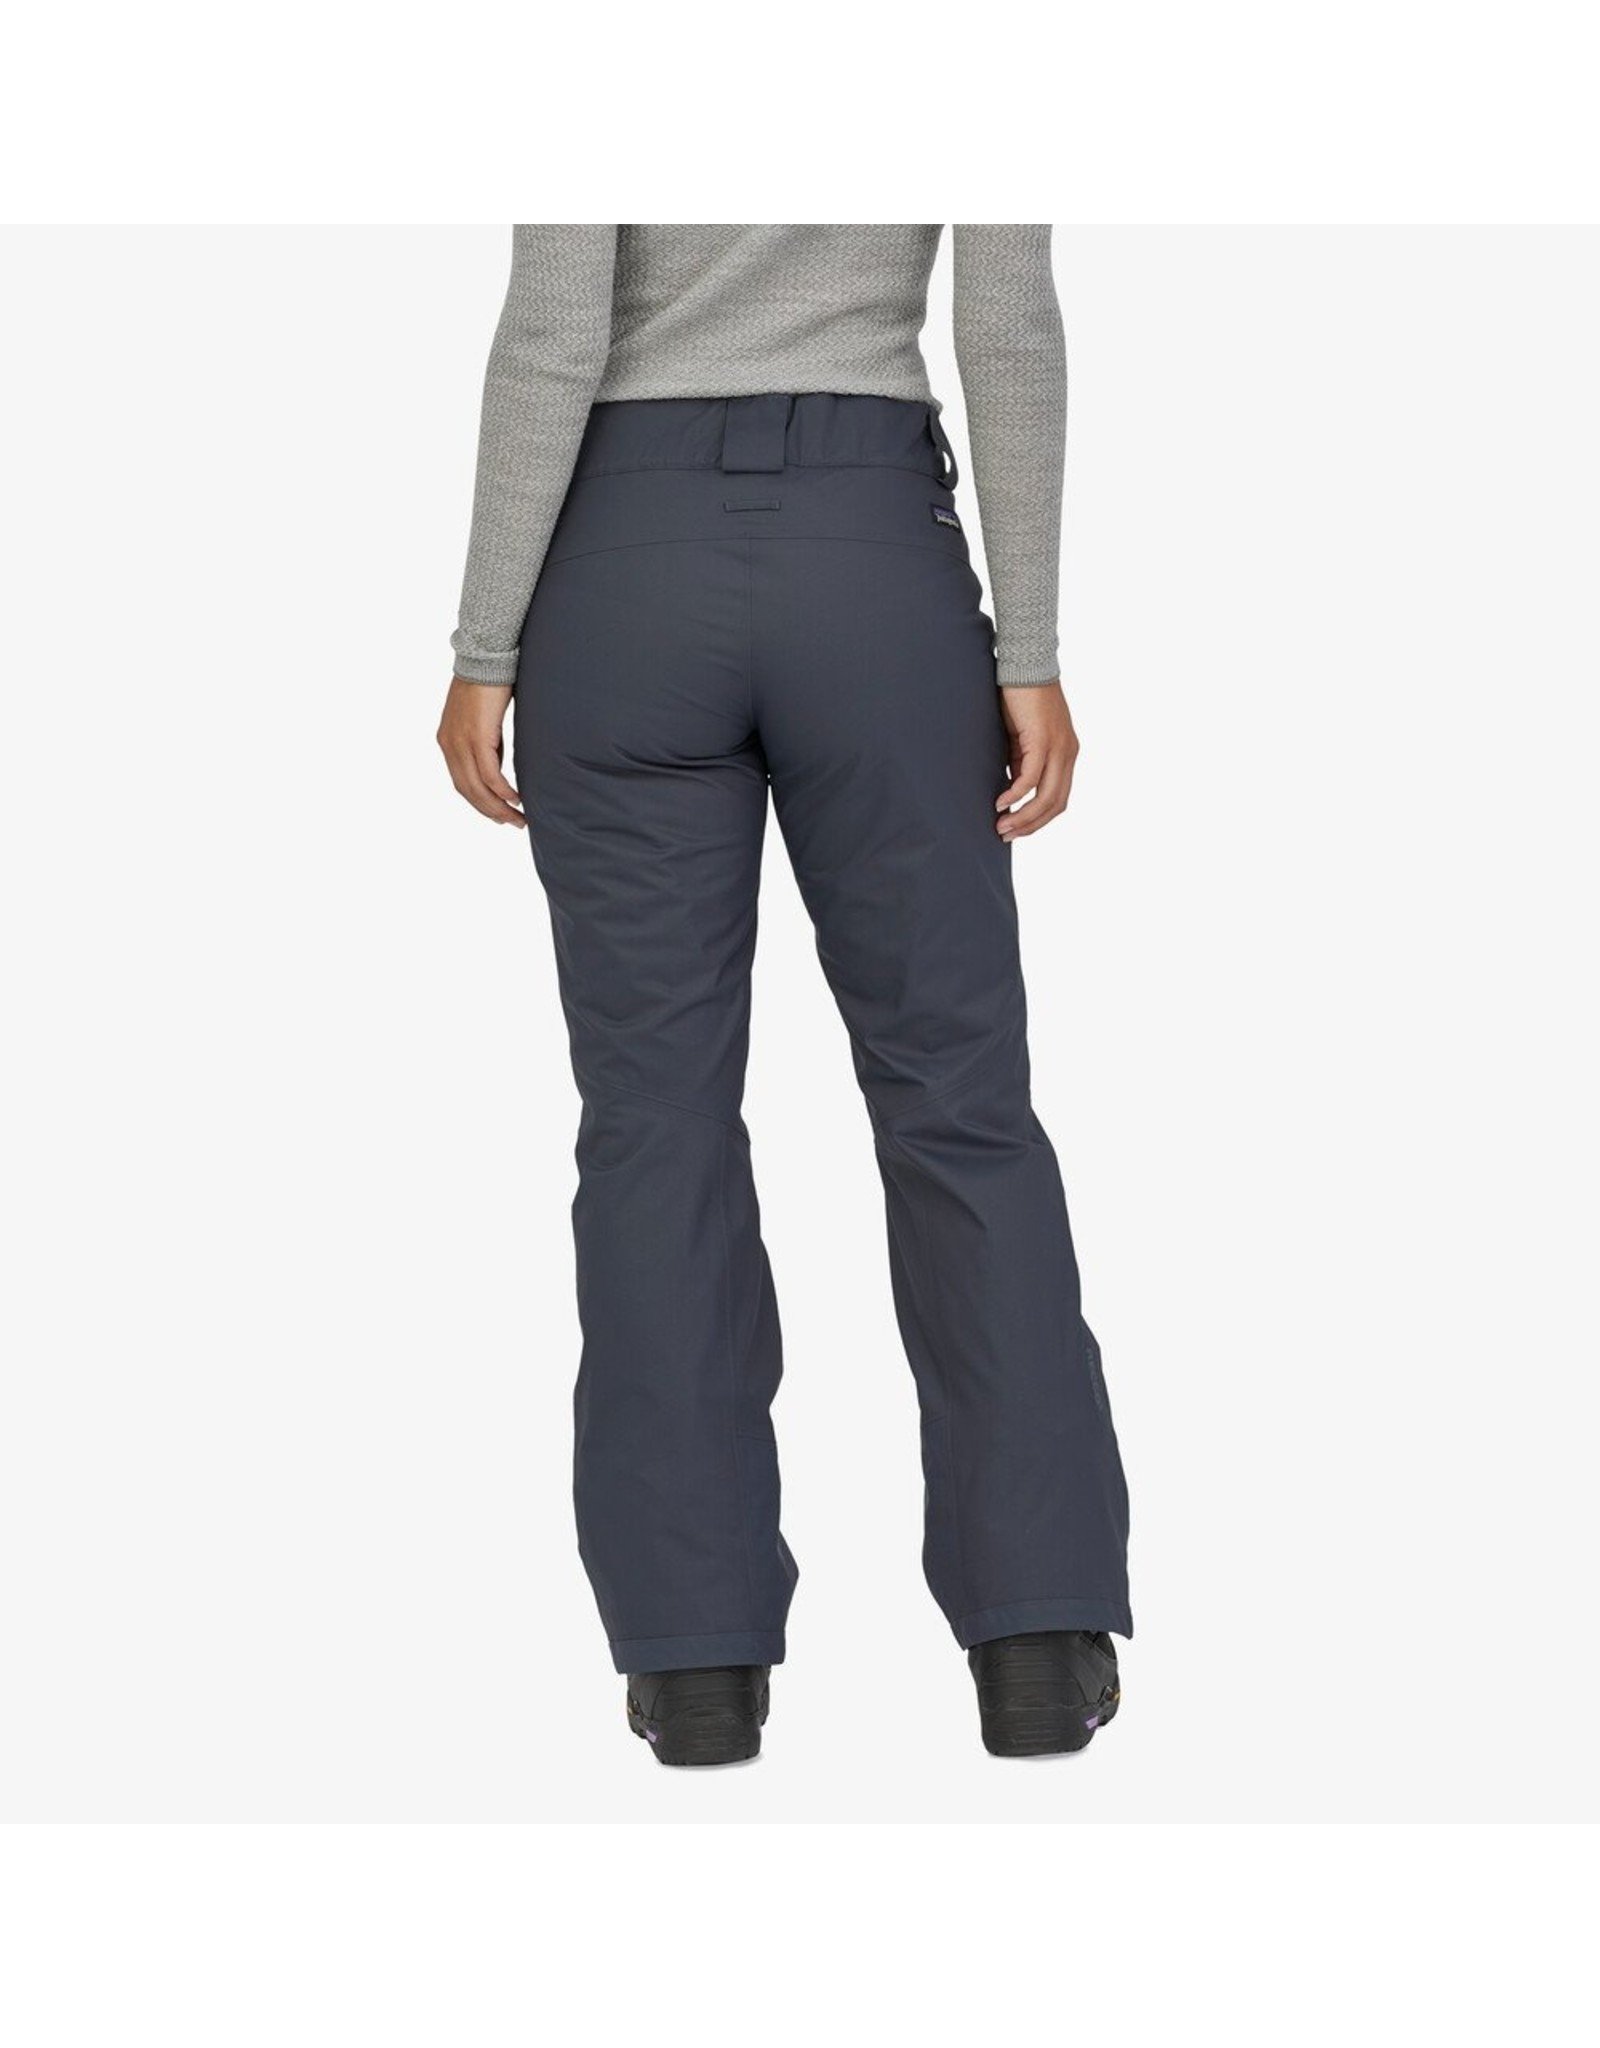 Patagonia Patagonia - W’s Insulated Snowbelle Pants - Reg